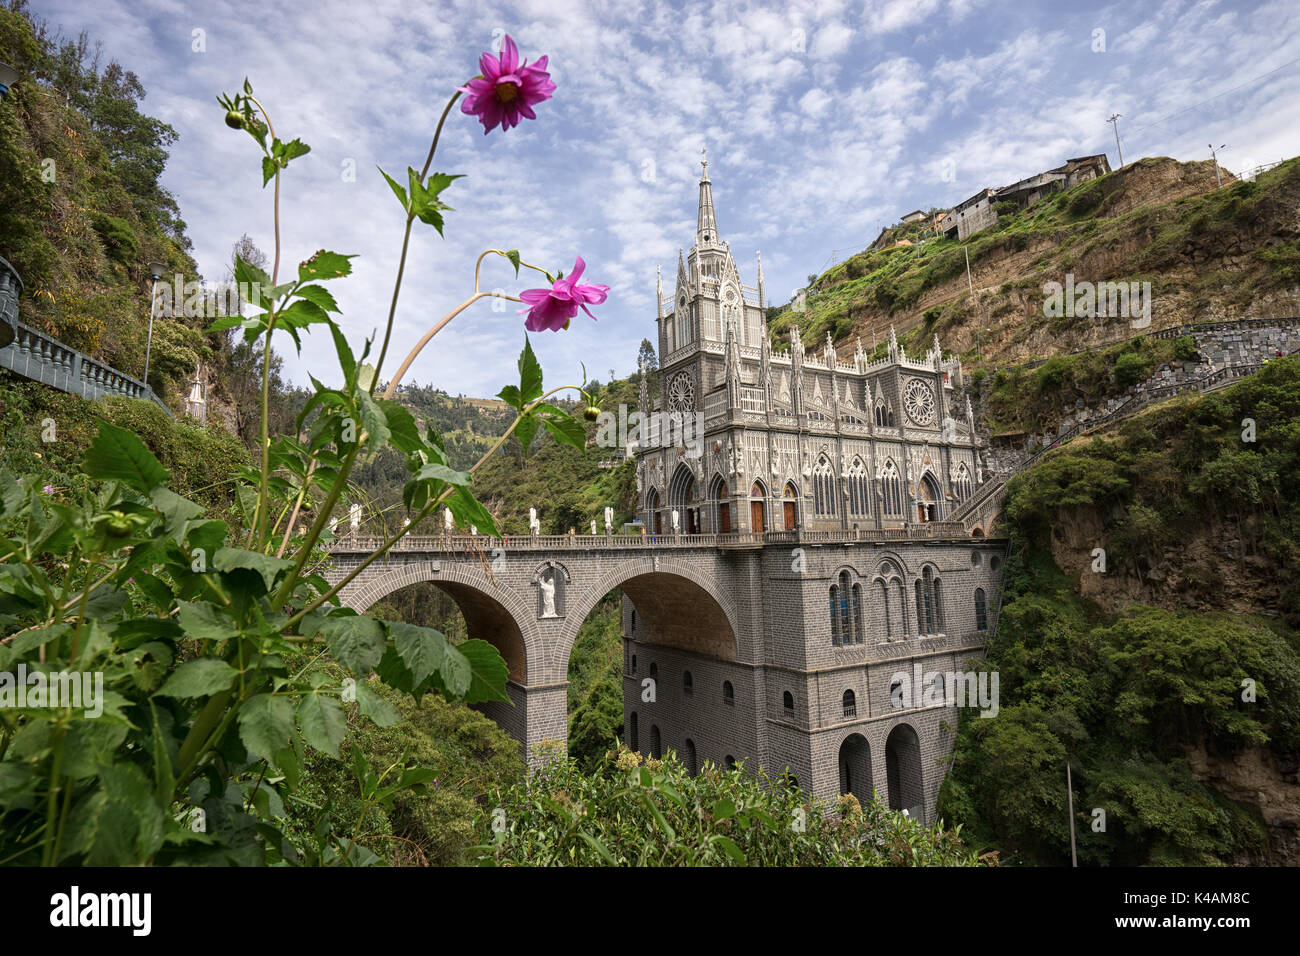 February 23, 2017 Las Lajas, Colombia:  the famous sanctury built on the top of a canyon with blooming flowers in the foreground Stock Photo